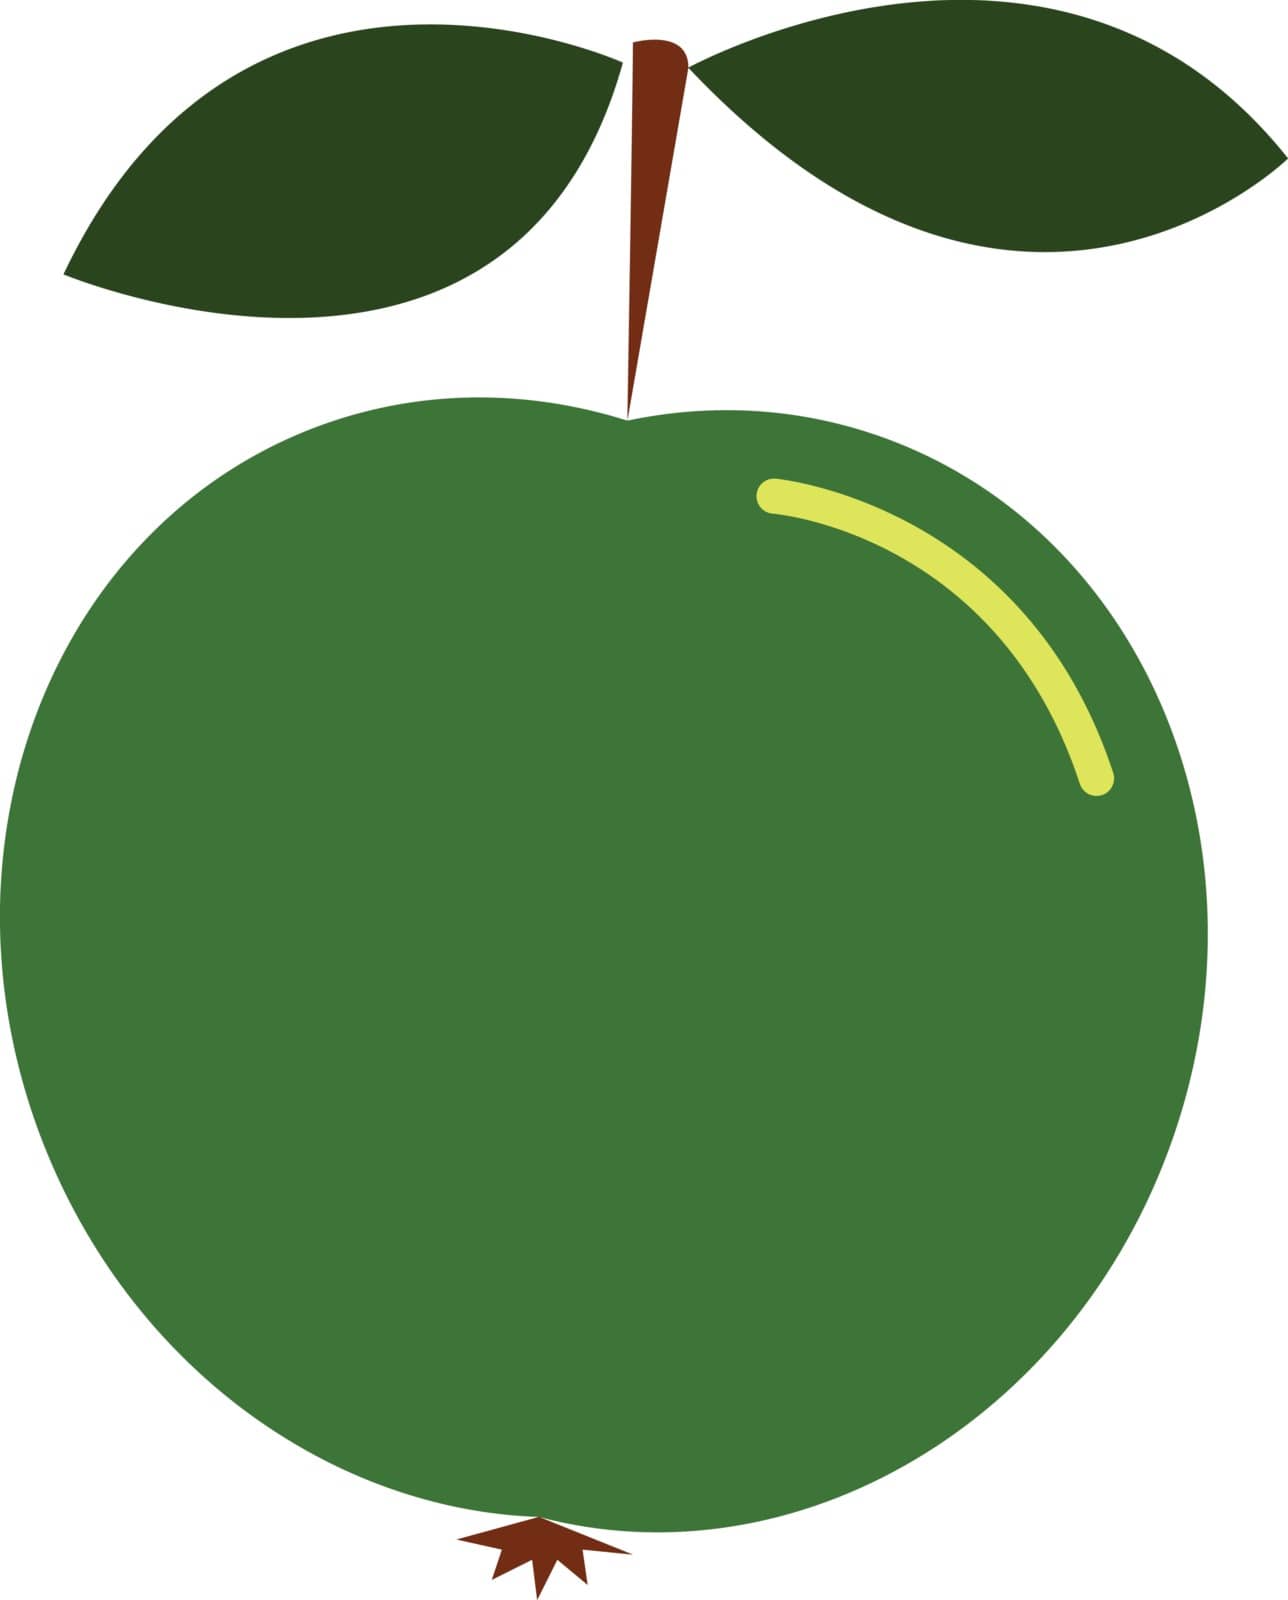 Clipart of a green apple with a short brown stalk and two leaves at the top and brown calyx at the bottom  vector  color drawing or illustration